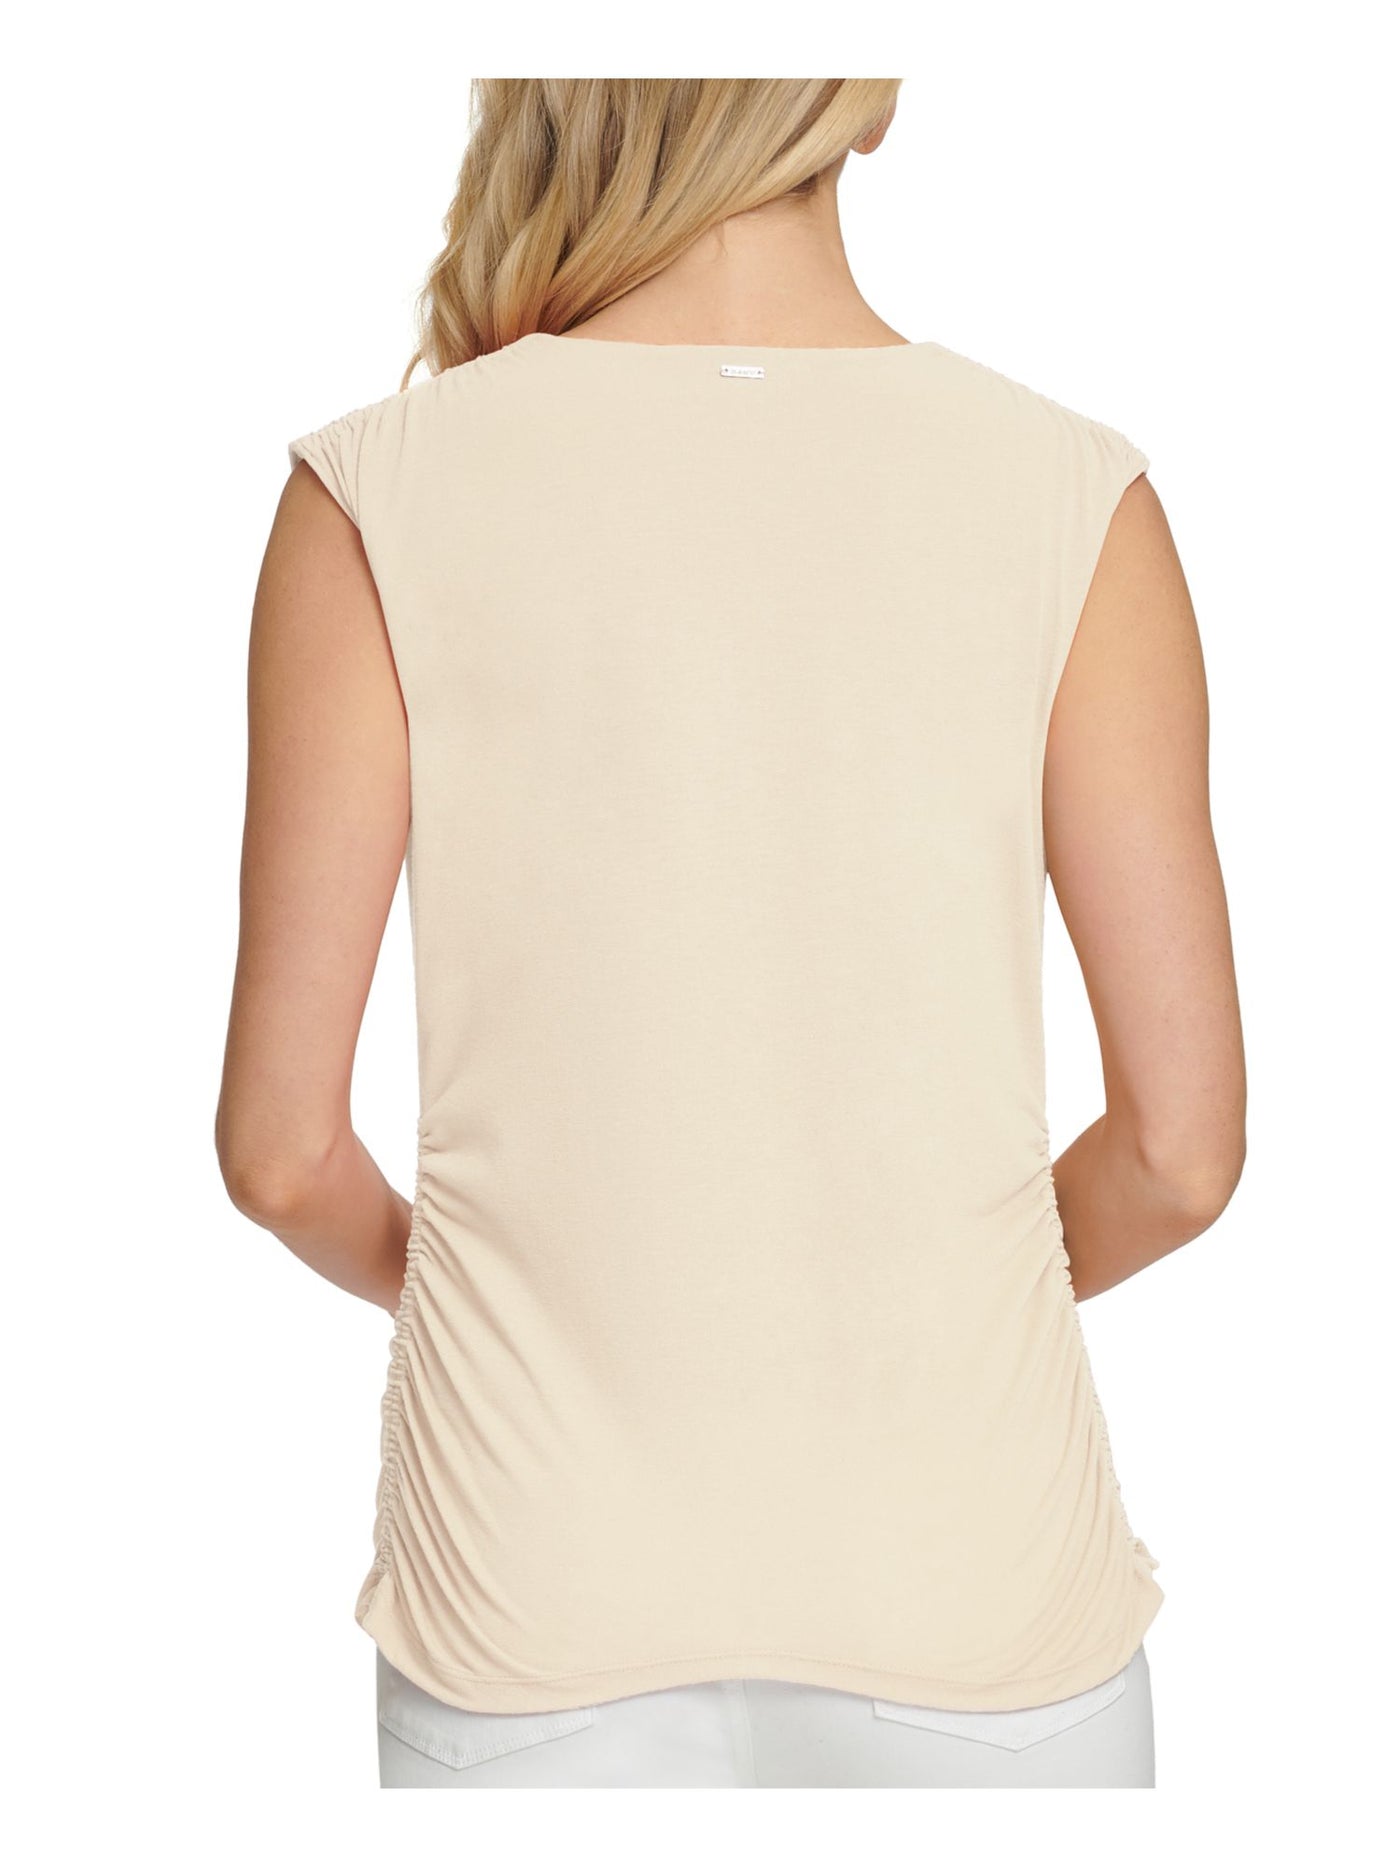 DKNY Womens Beige Stretch Ruched Sleeveless V Neck Wear To Work Top S